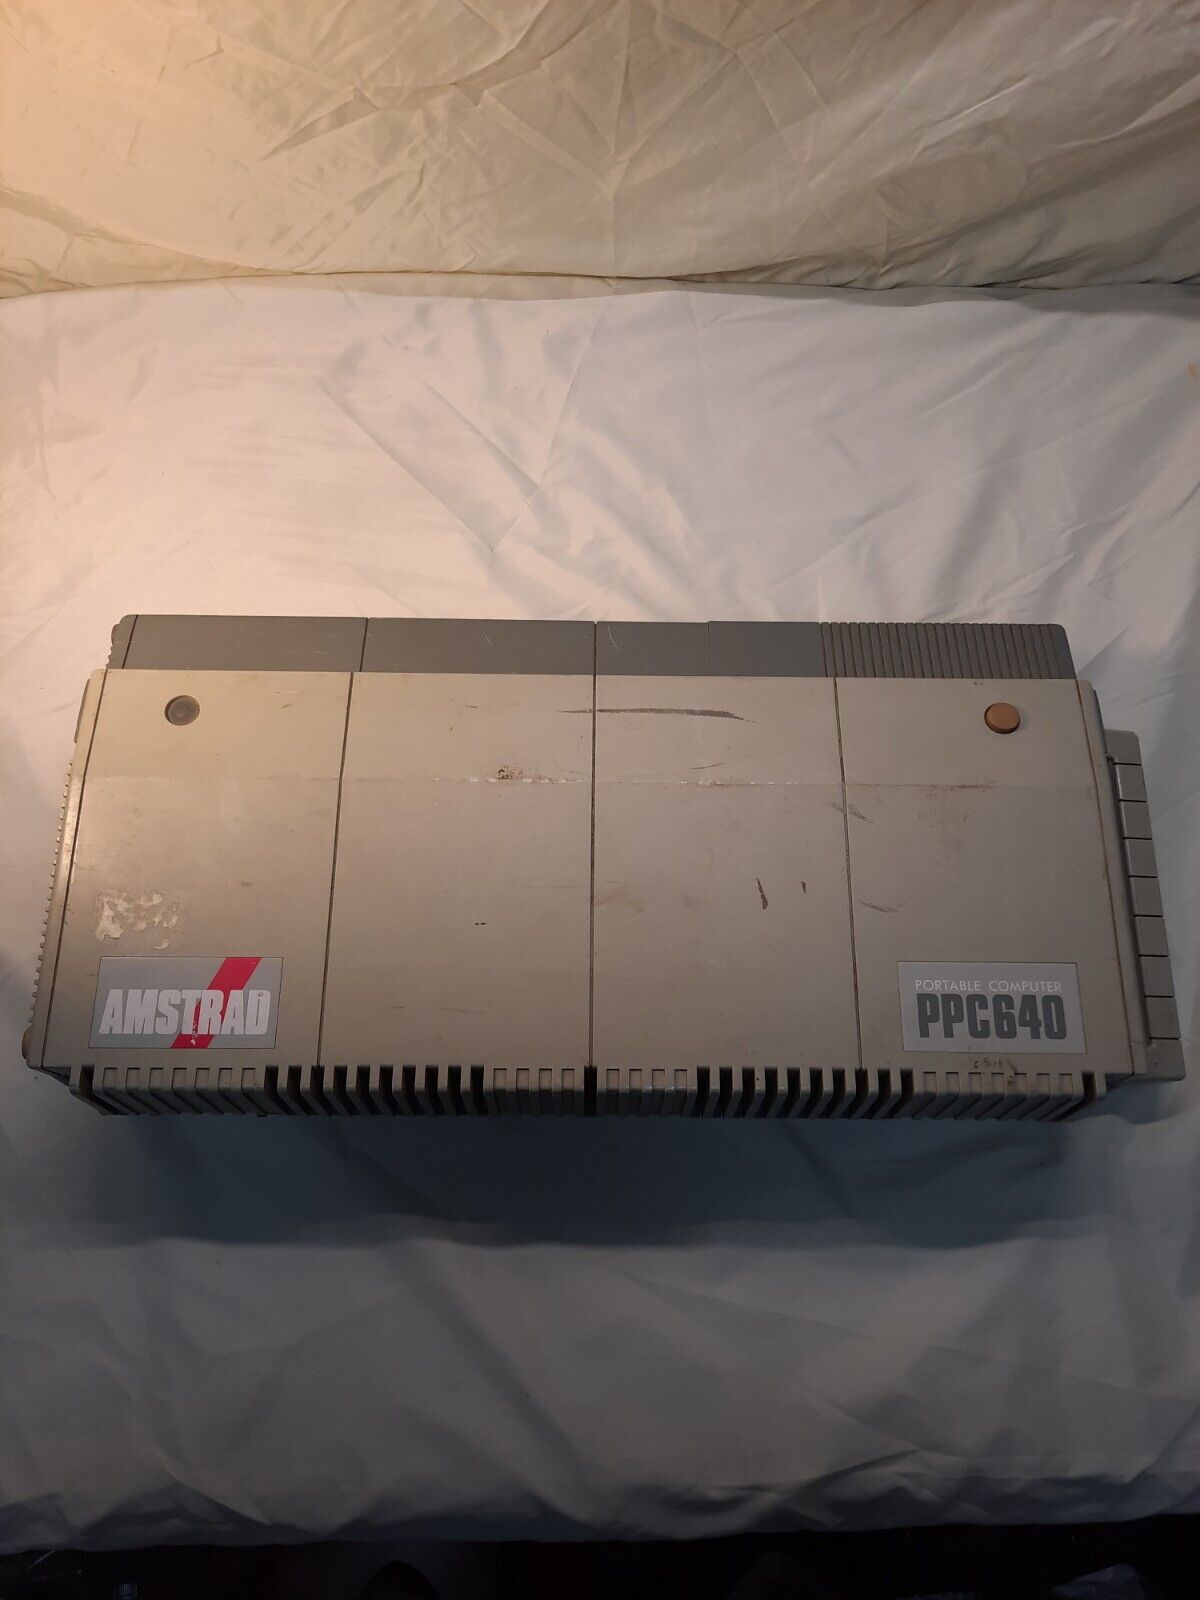 AMSTRAD PPC 640 Portable Computer/ For Parts Or Repair/ Sold As Is